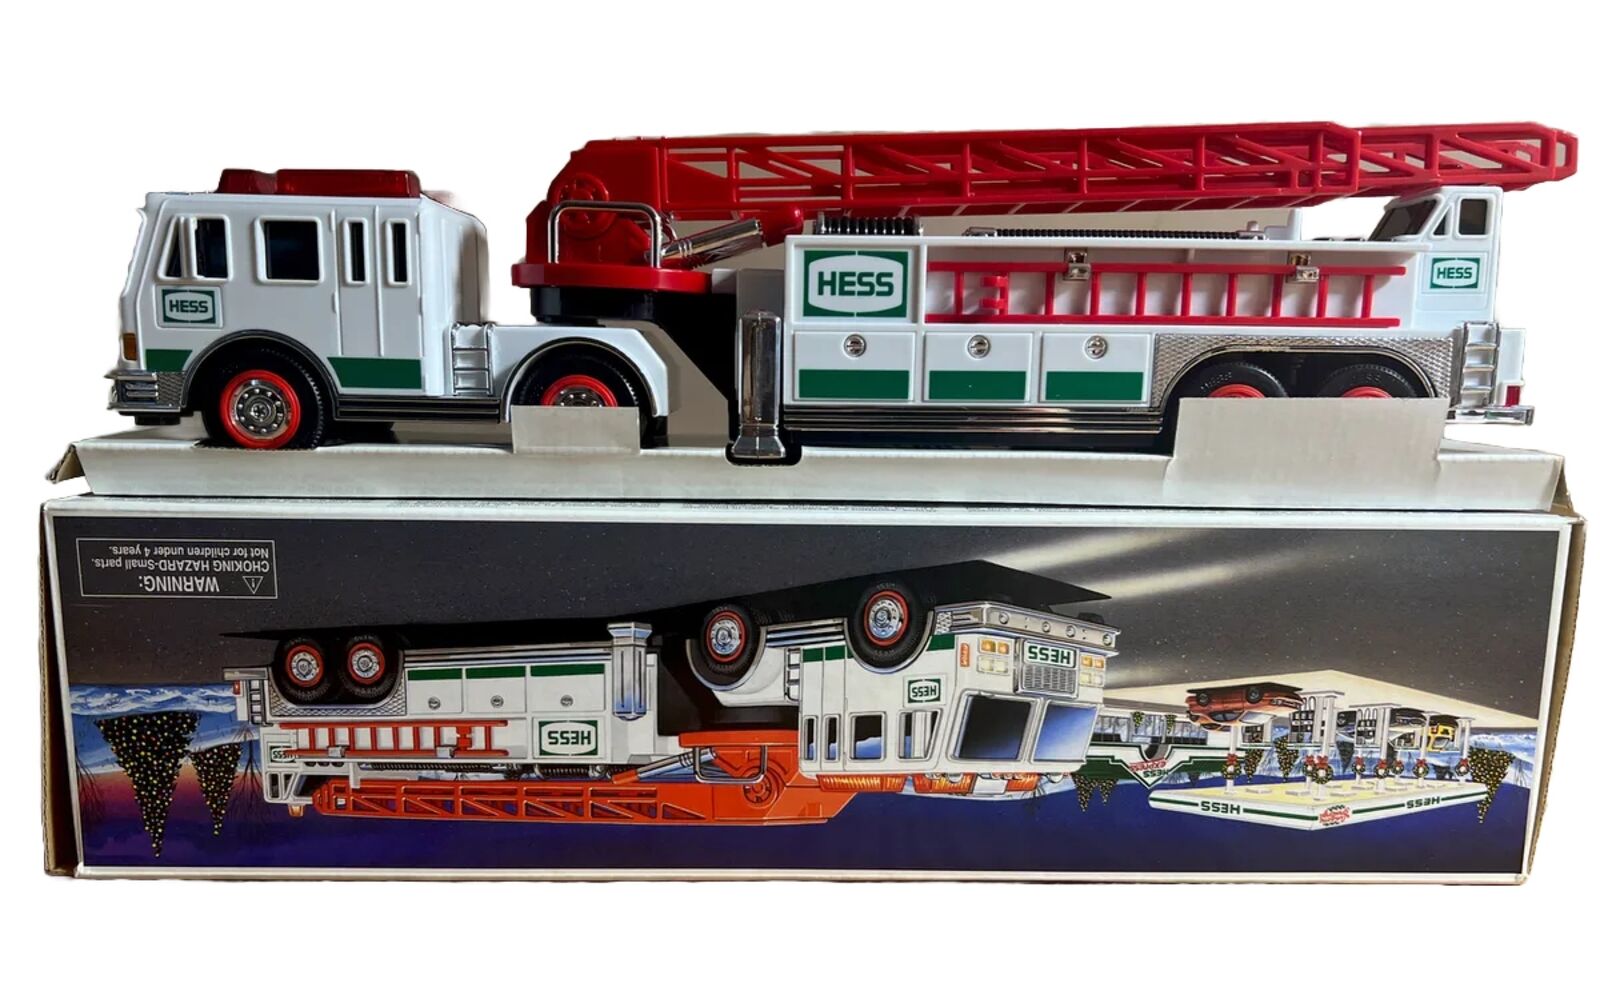 2000 Hess Toy Fire Truck - New in Box